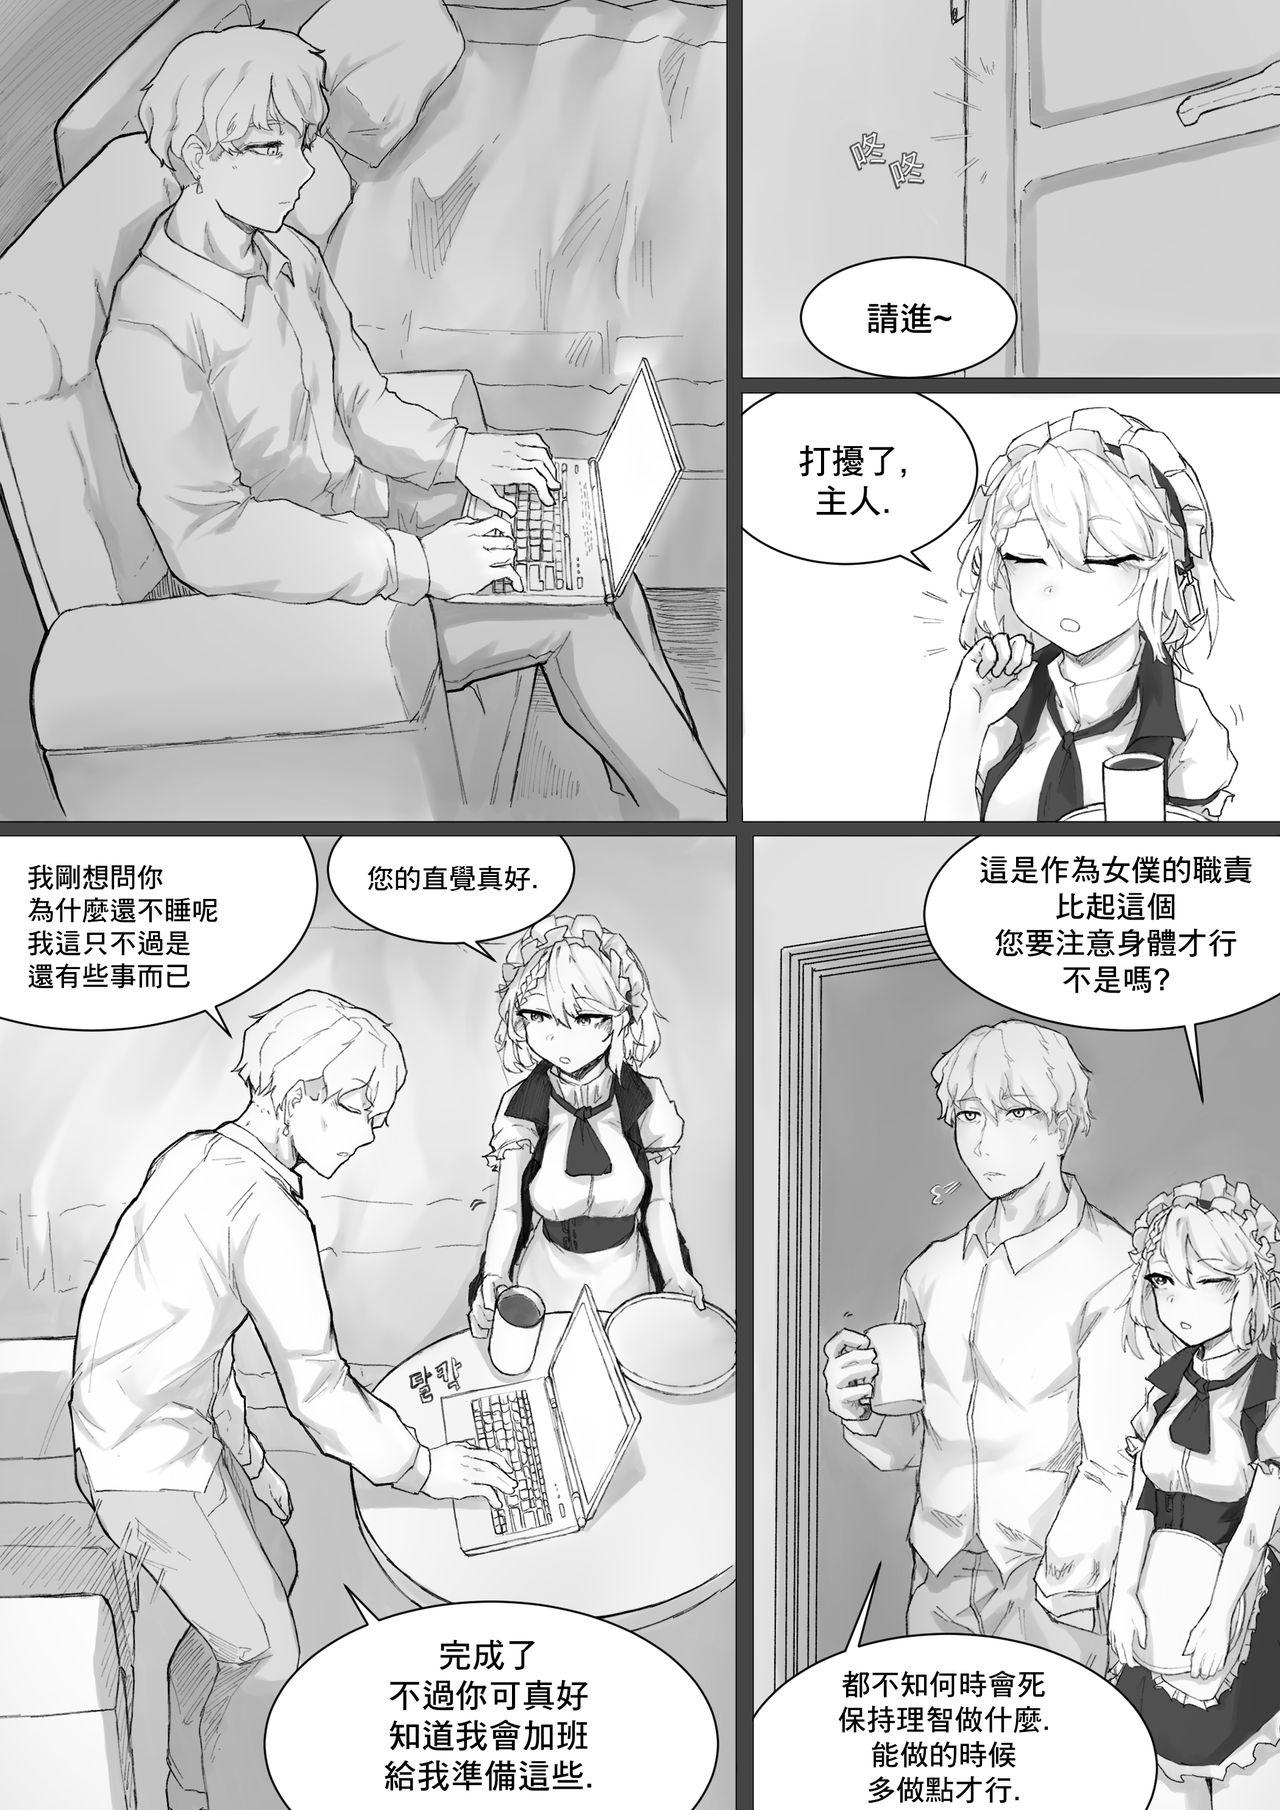 18 Porn How To Use G36 - Girls frontline Creampies - Page 4